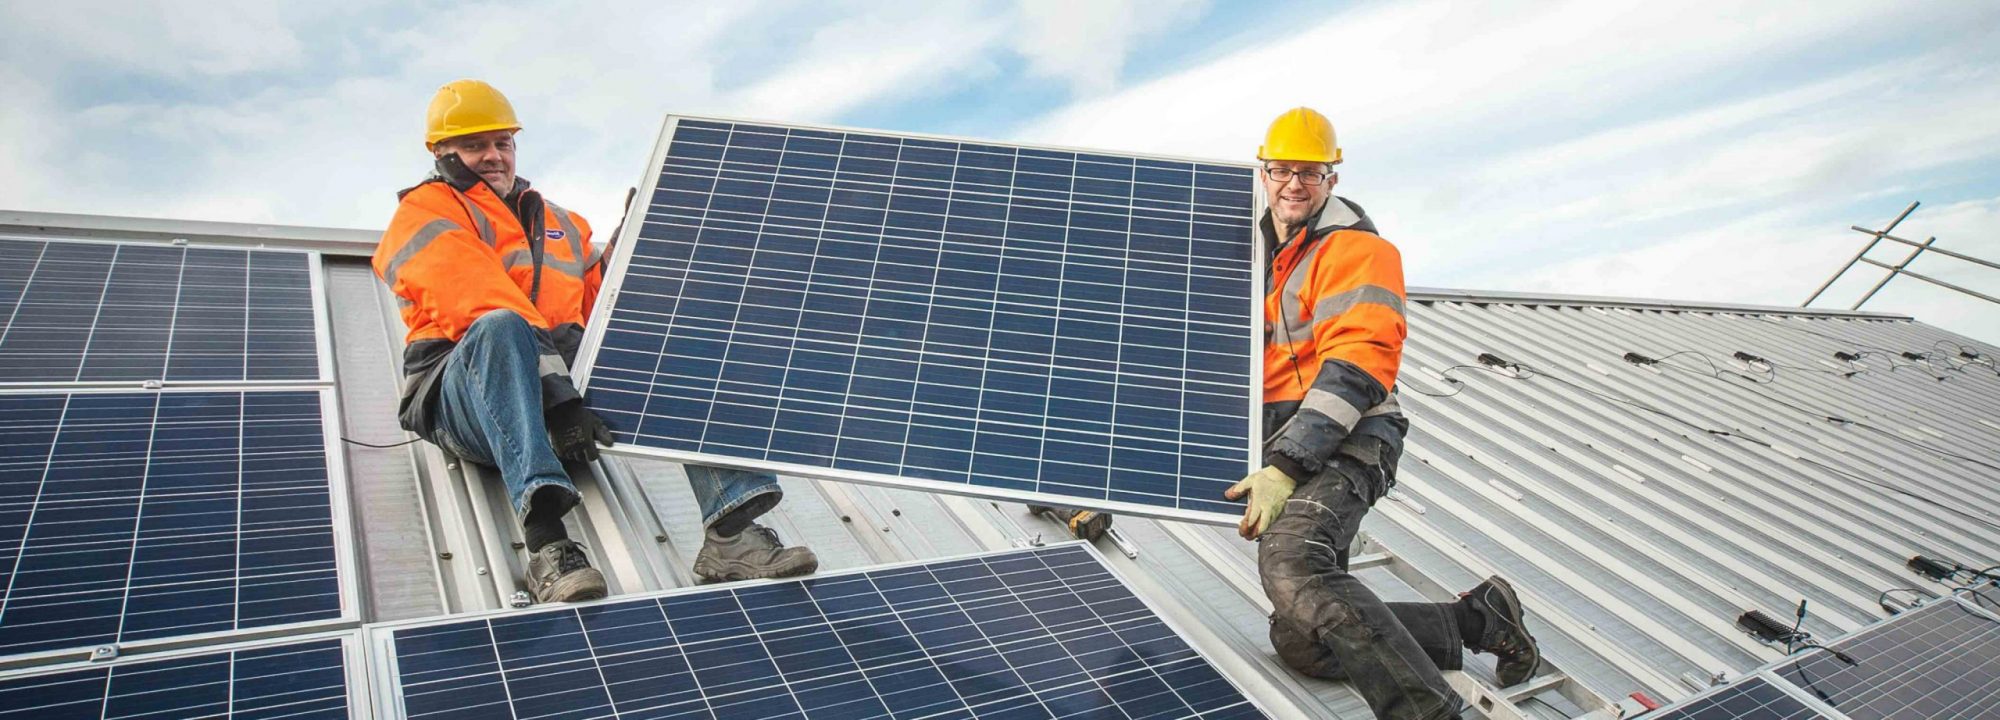 Power to Change and Big Society Capital launch £40m investment partnership to help communities take over local solar farms